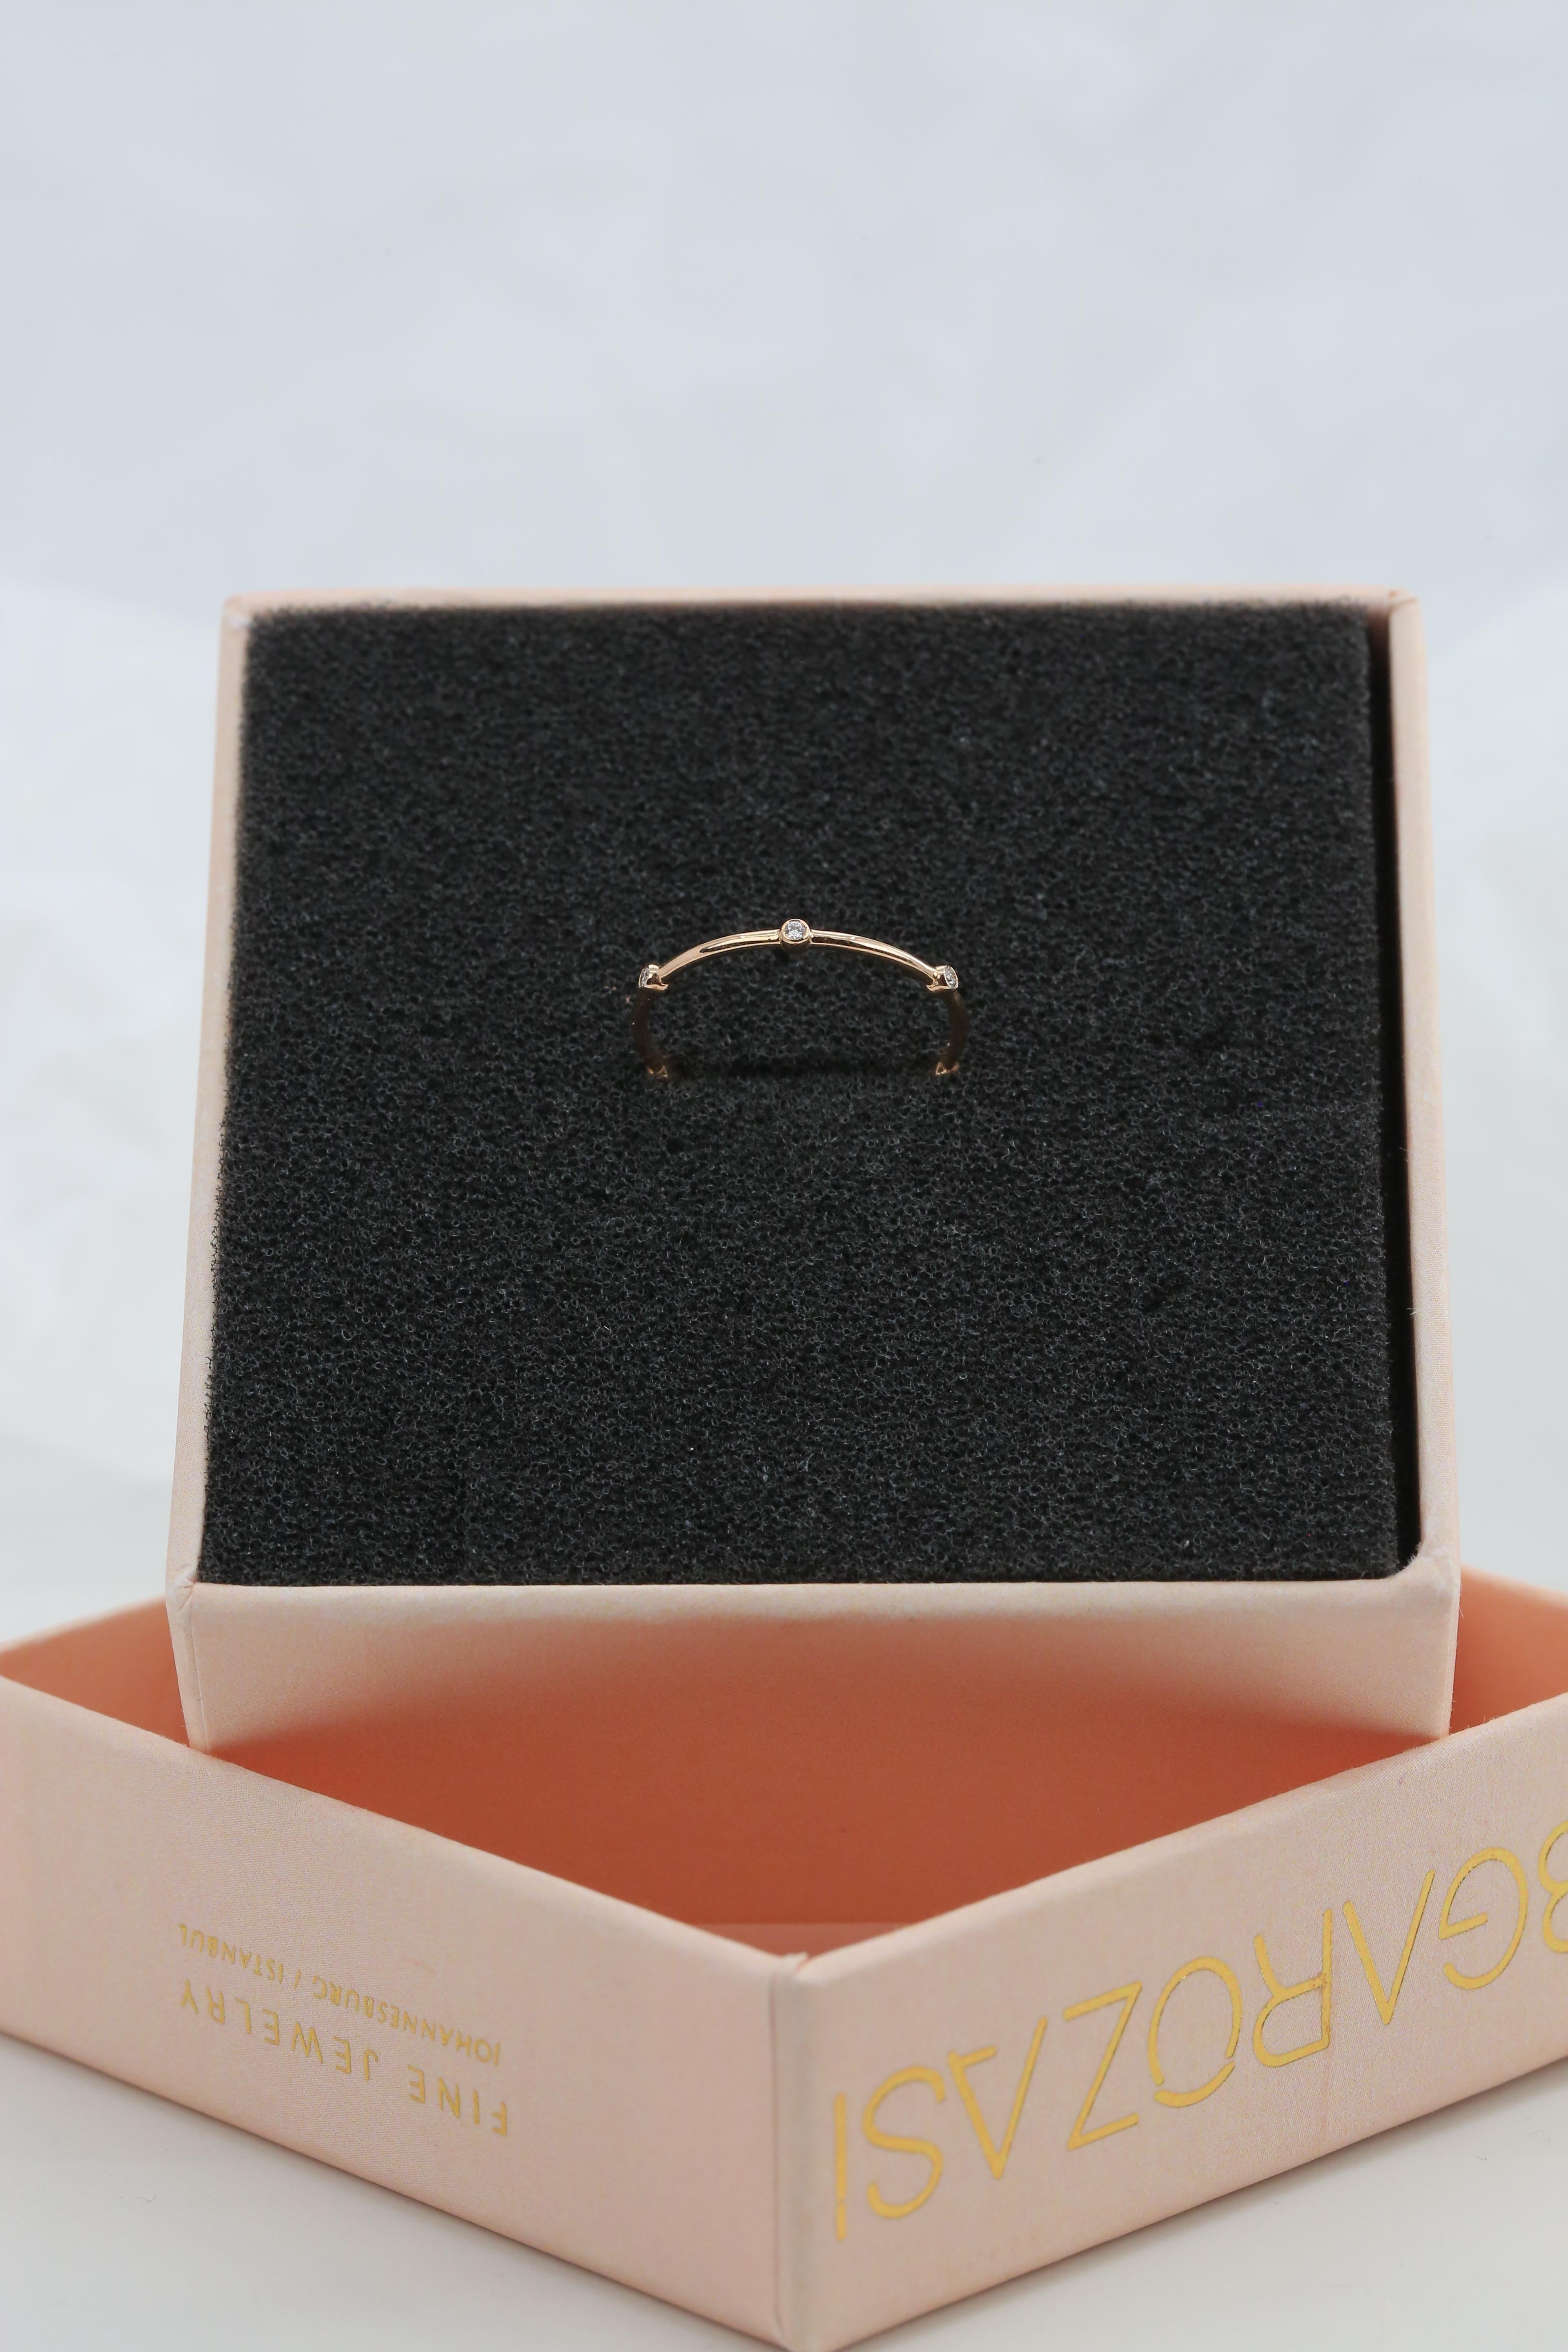 For Sale:  Six Bezel Diamond Ring, 14K Solid Gold Dainty Ring, Stackable Ring, Minimalist 5